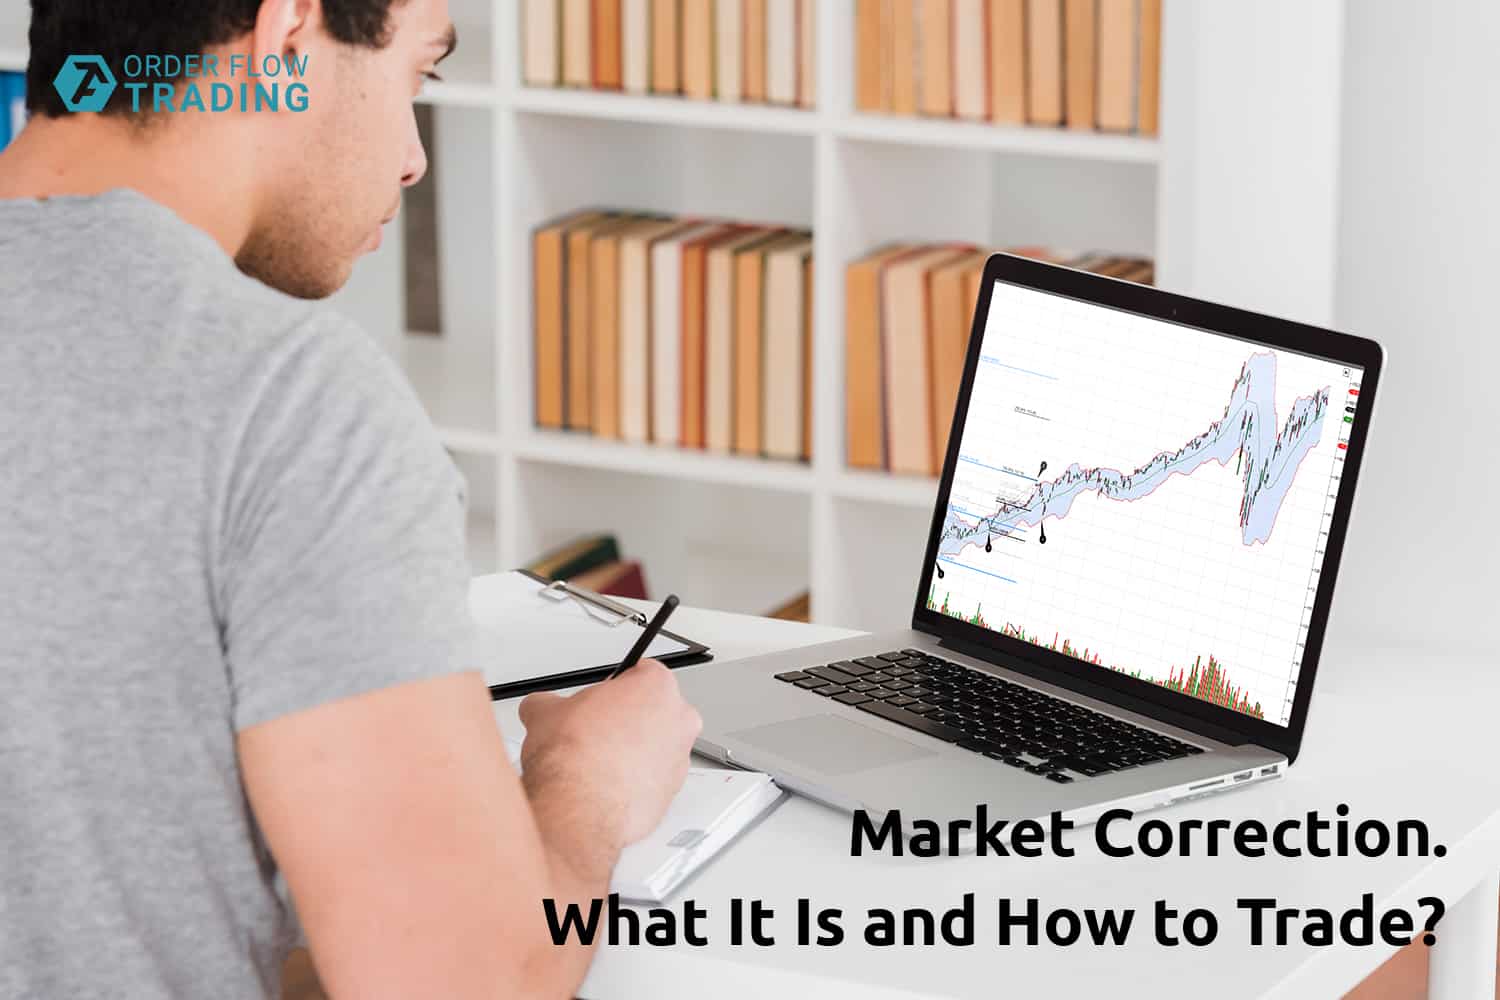 Market correction. What it is and how to trade?